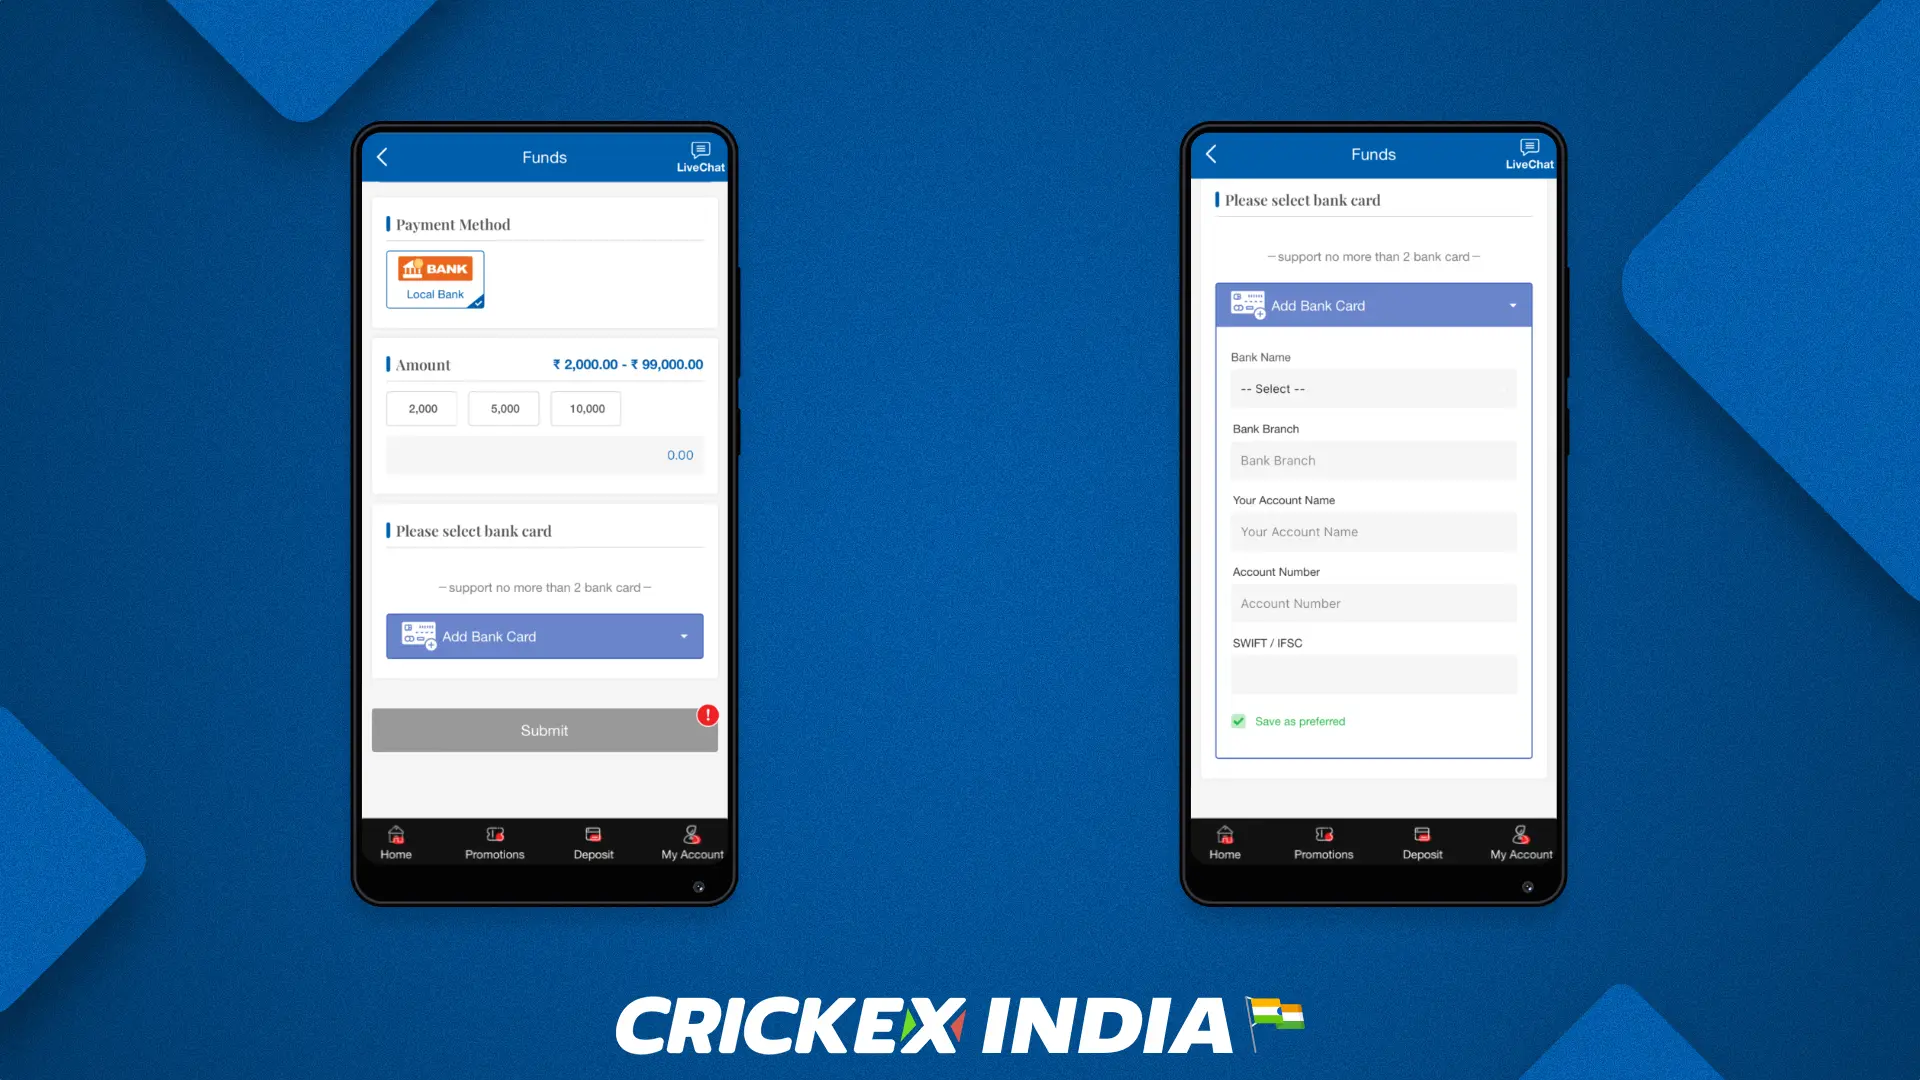 In order to withdraw money from the Crickex app you need to meet several conditions